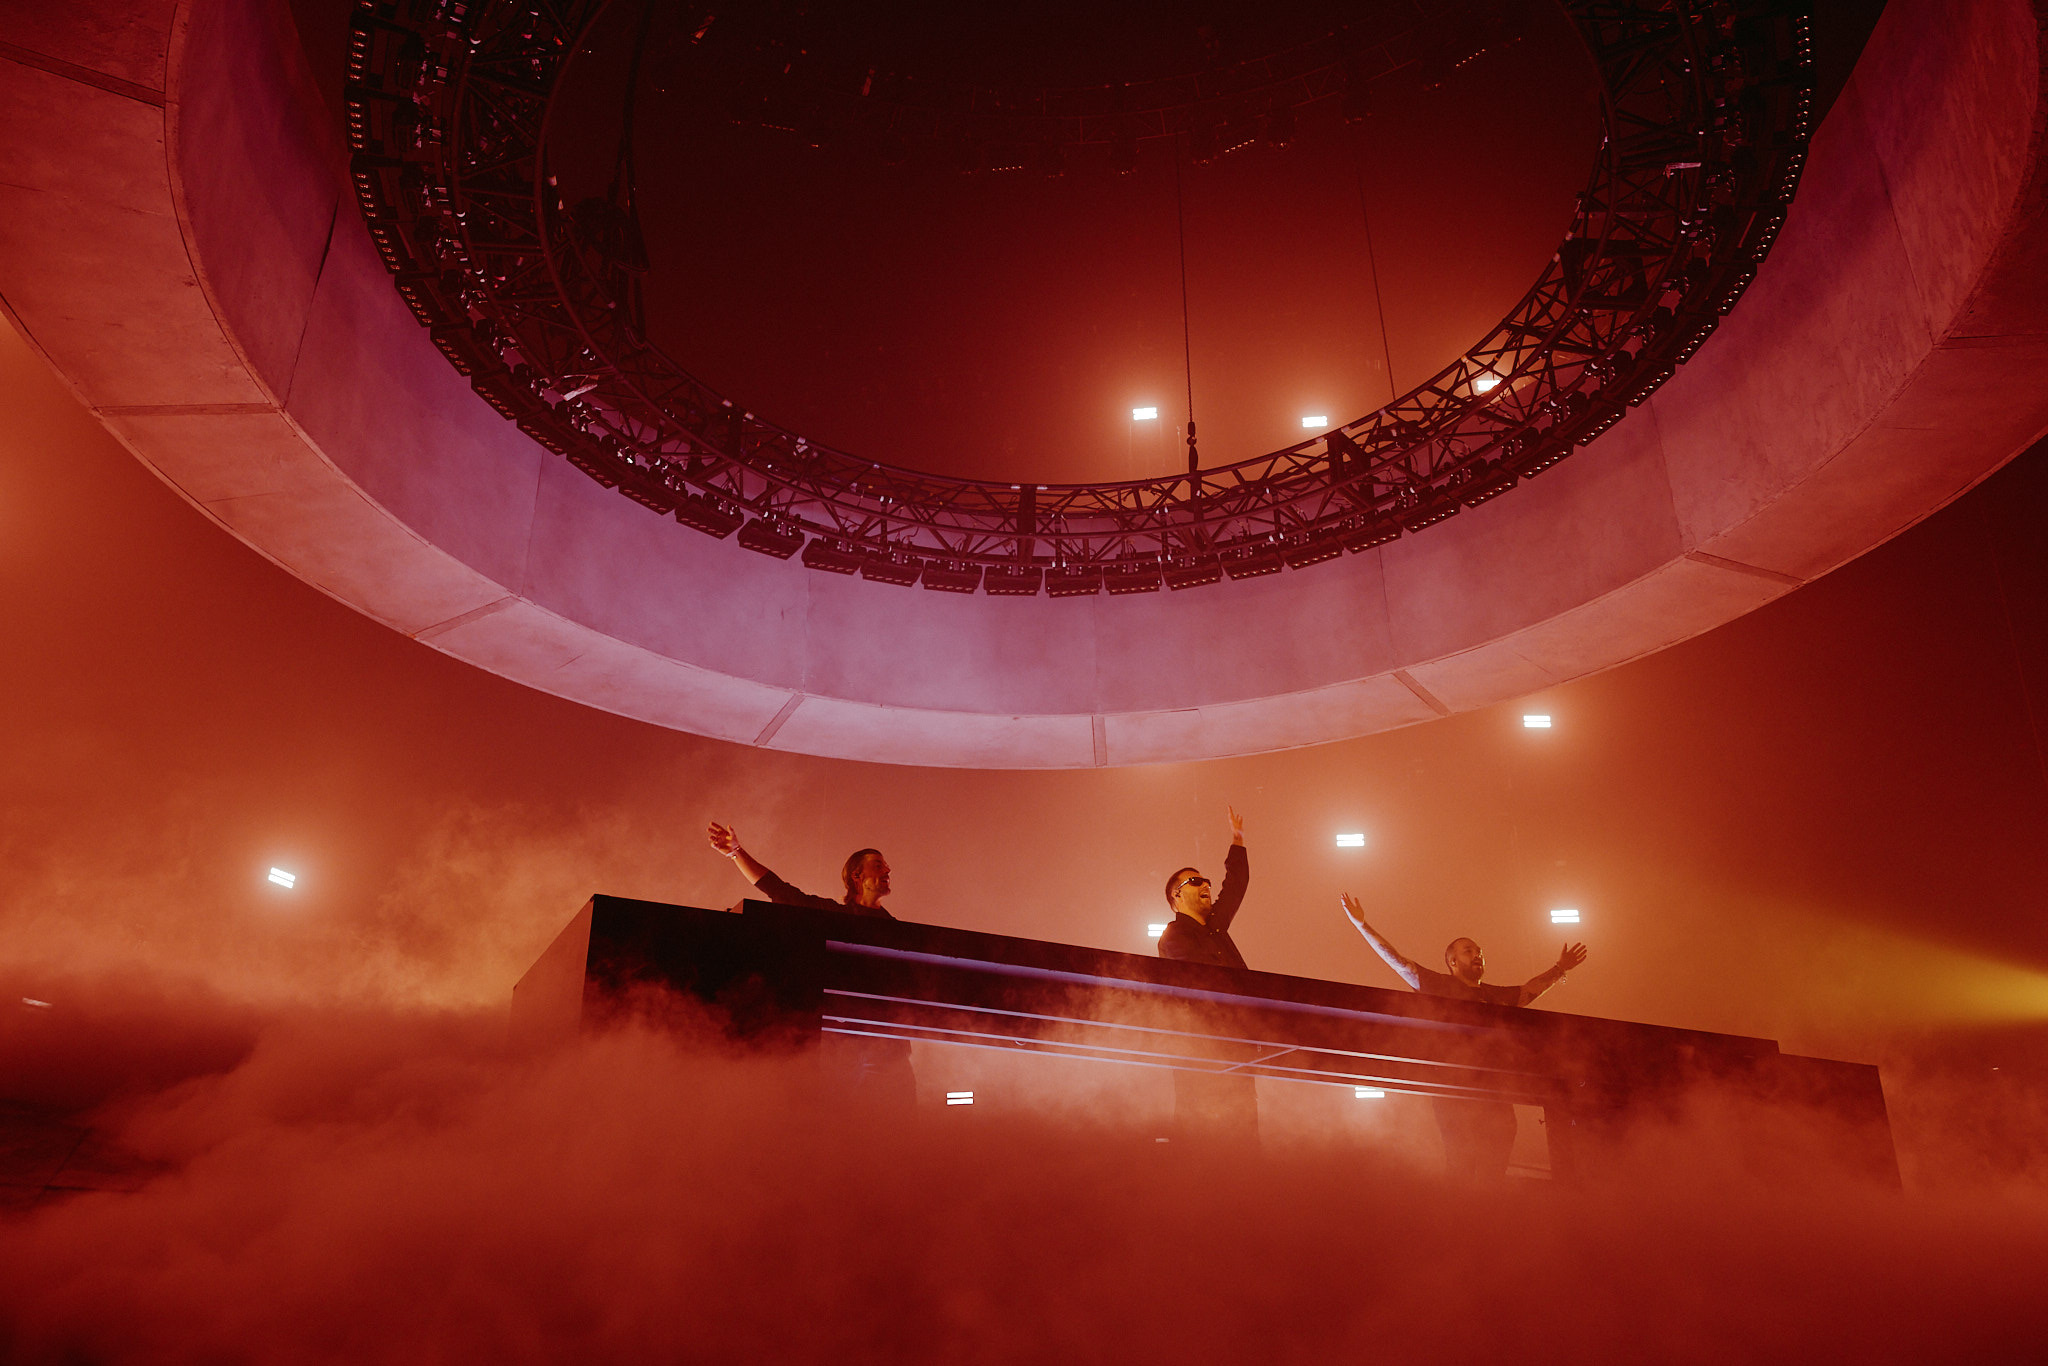 Swedish House Mafia and The Weeknd Join Forces on New Song 'Moth to a Flame'